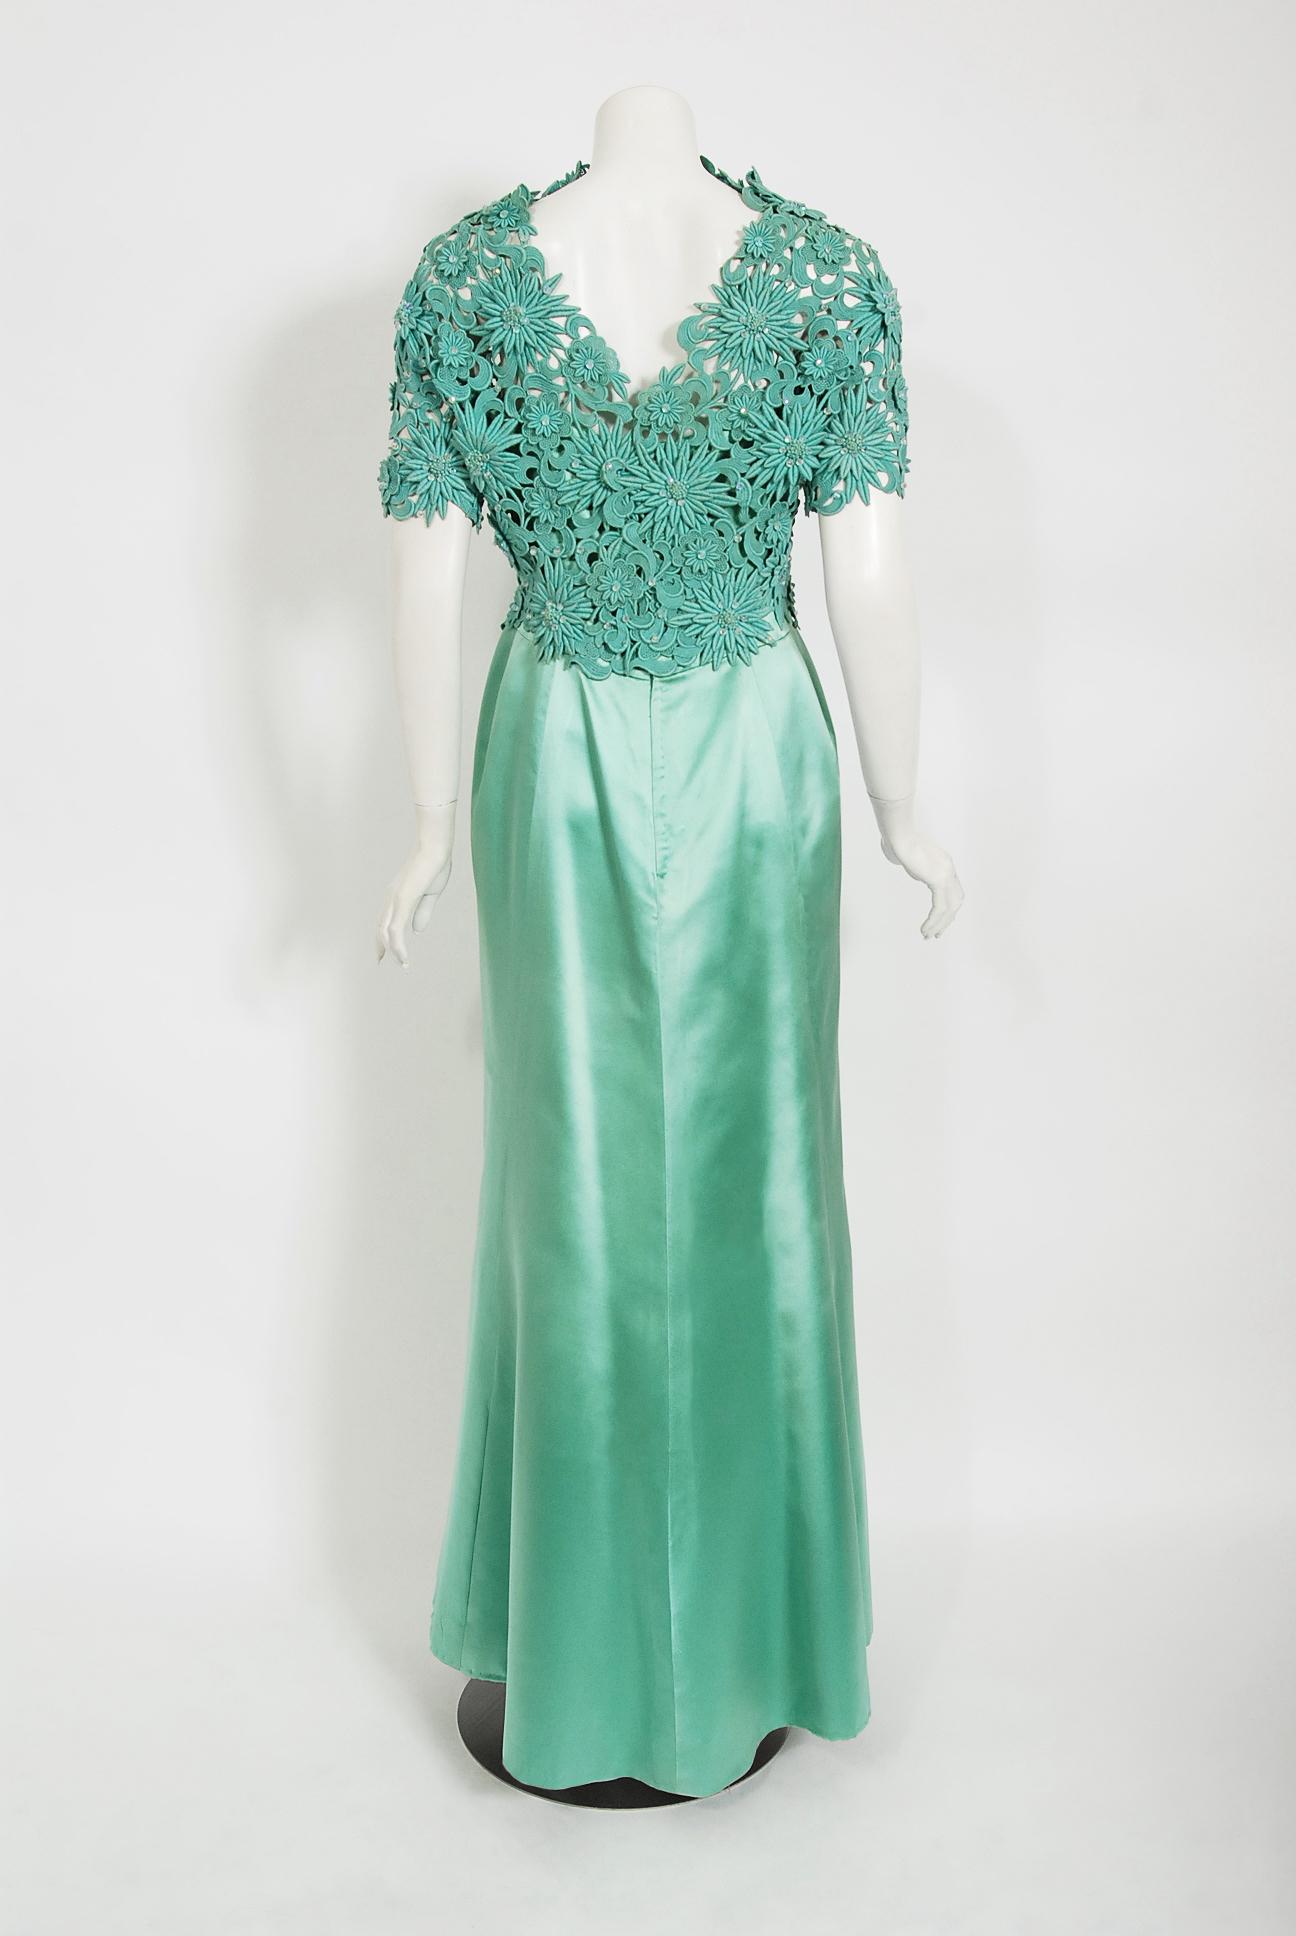 Vintage 1962 Nina Ricci Couture Seafoam Blue Green Beaded Lace Satin Fitted Gown 3